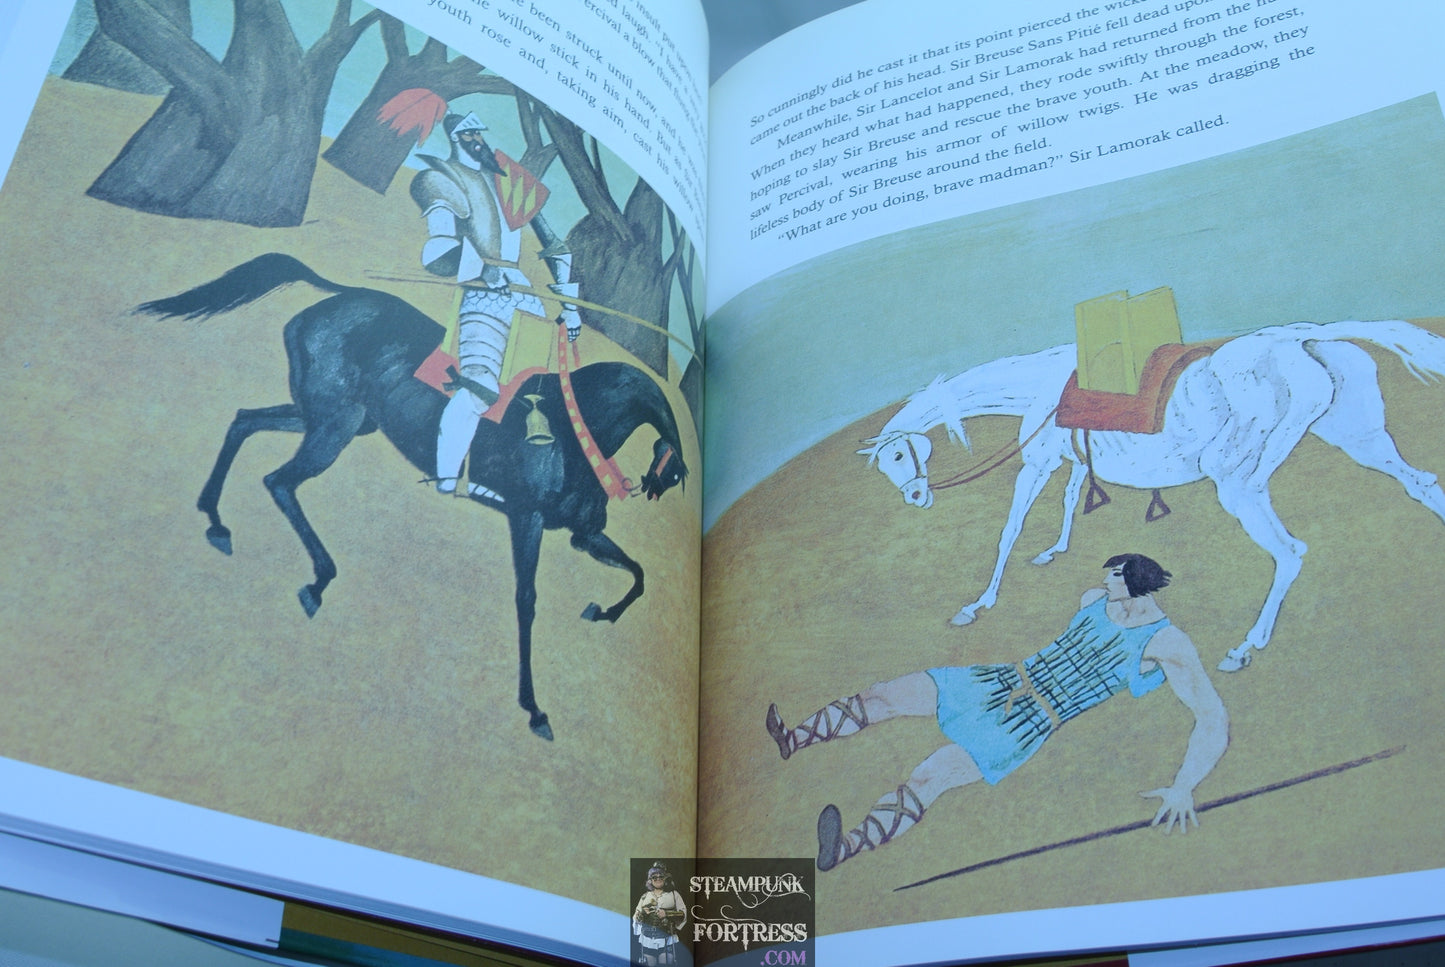 KING ARTHUR AND THE KNIGHTS OF THE ROUND TABLE ILLUSTRATED BY GUSTAF TENGGREN COFFEE TABLE BOOK VERY GOOD HARDCOVER EMMA GEDDERS STERNE